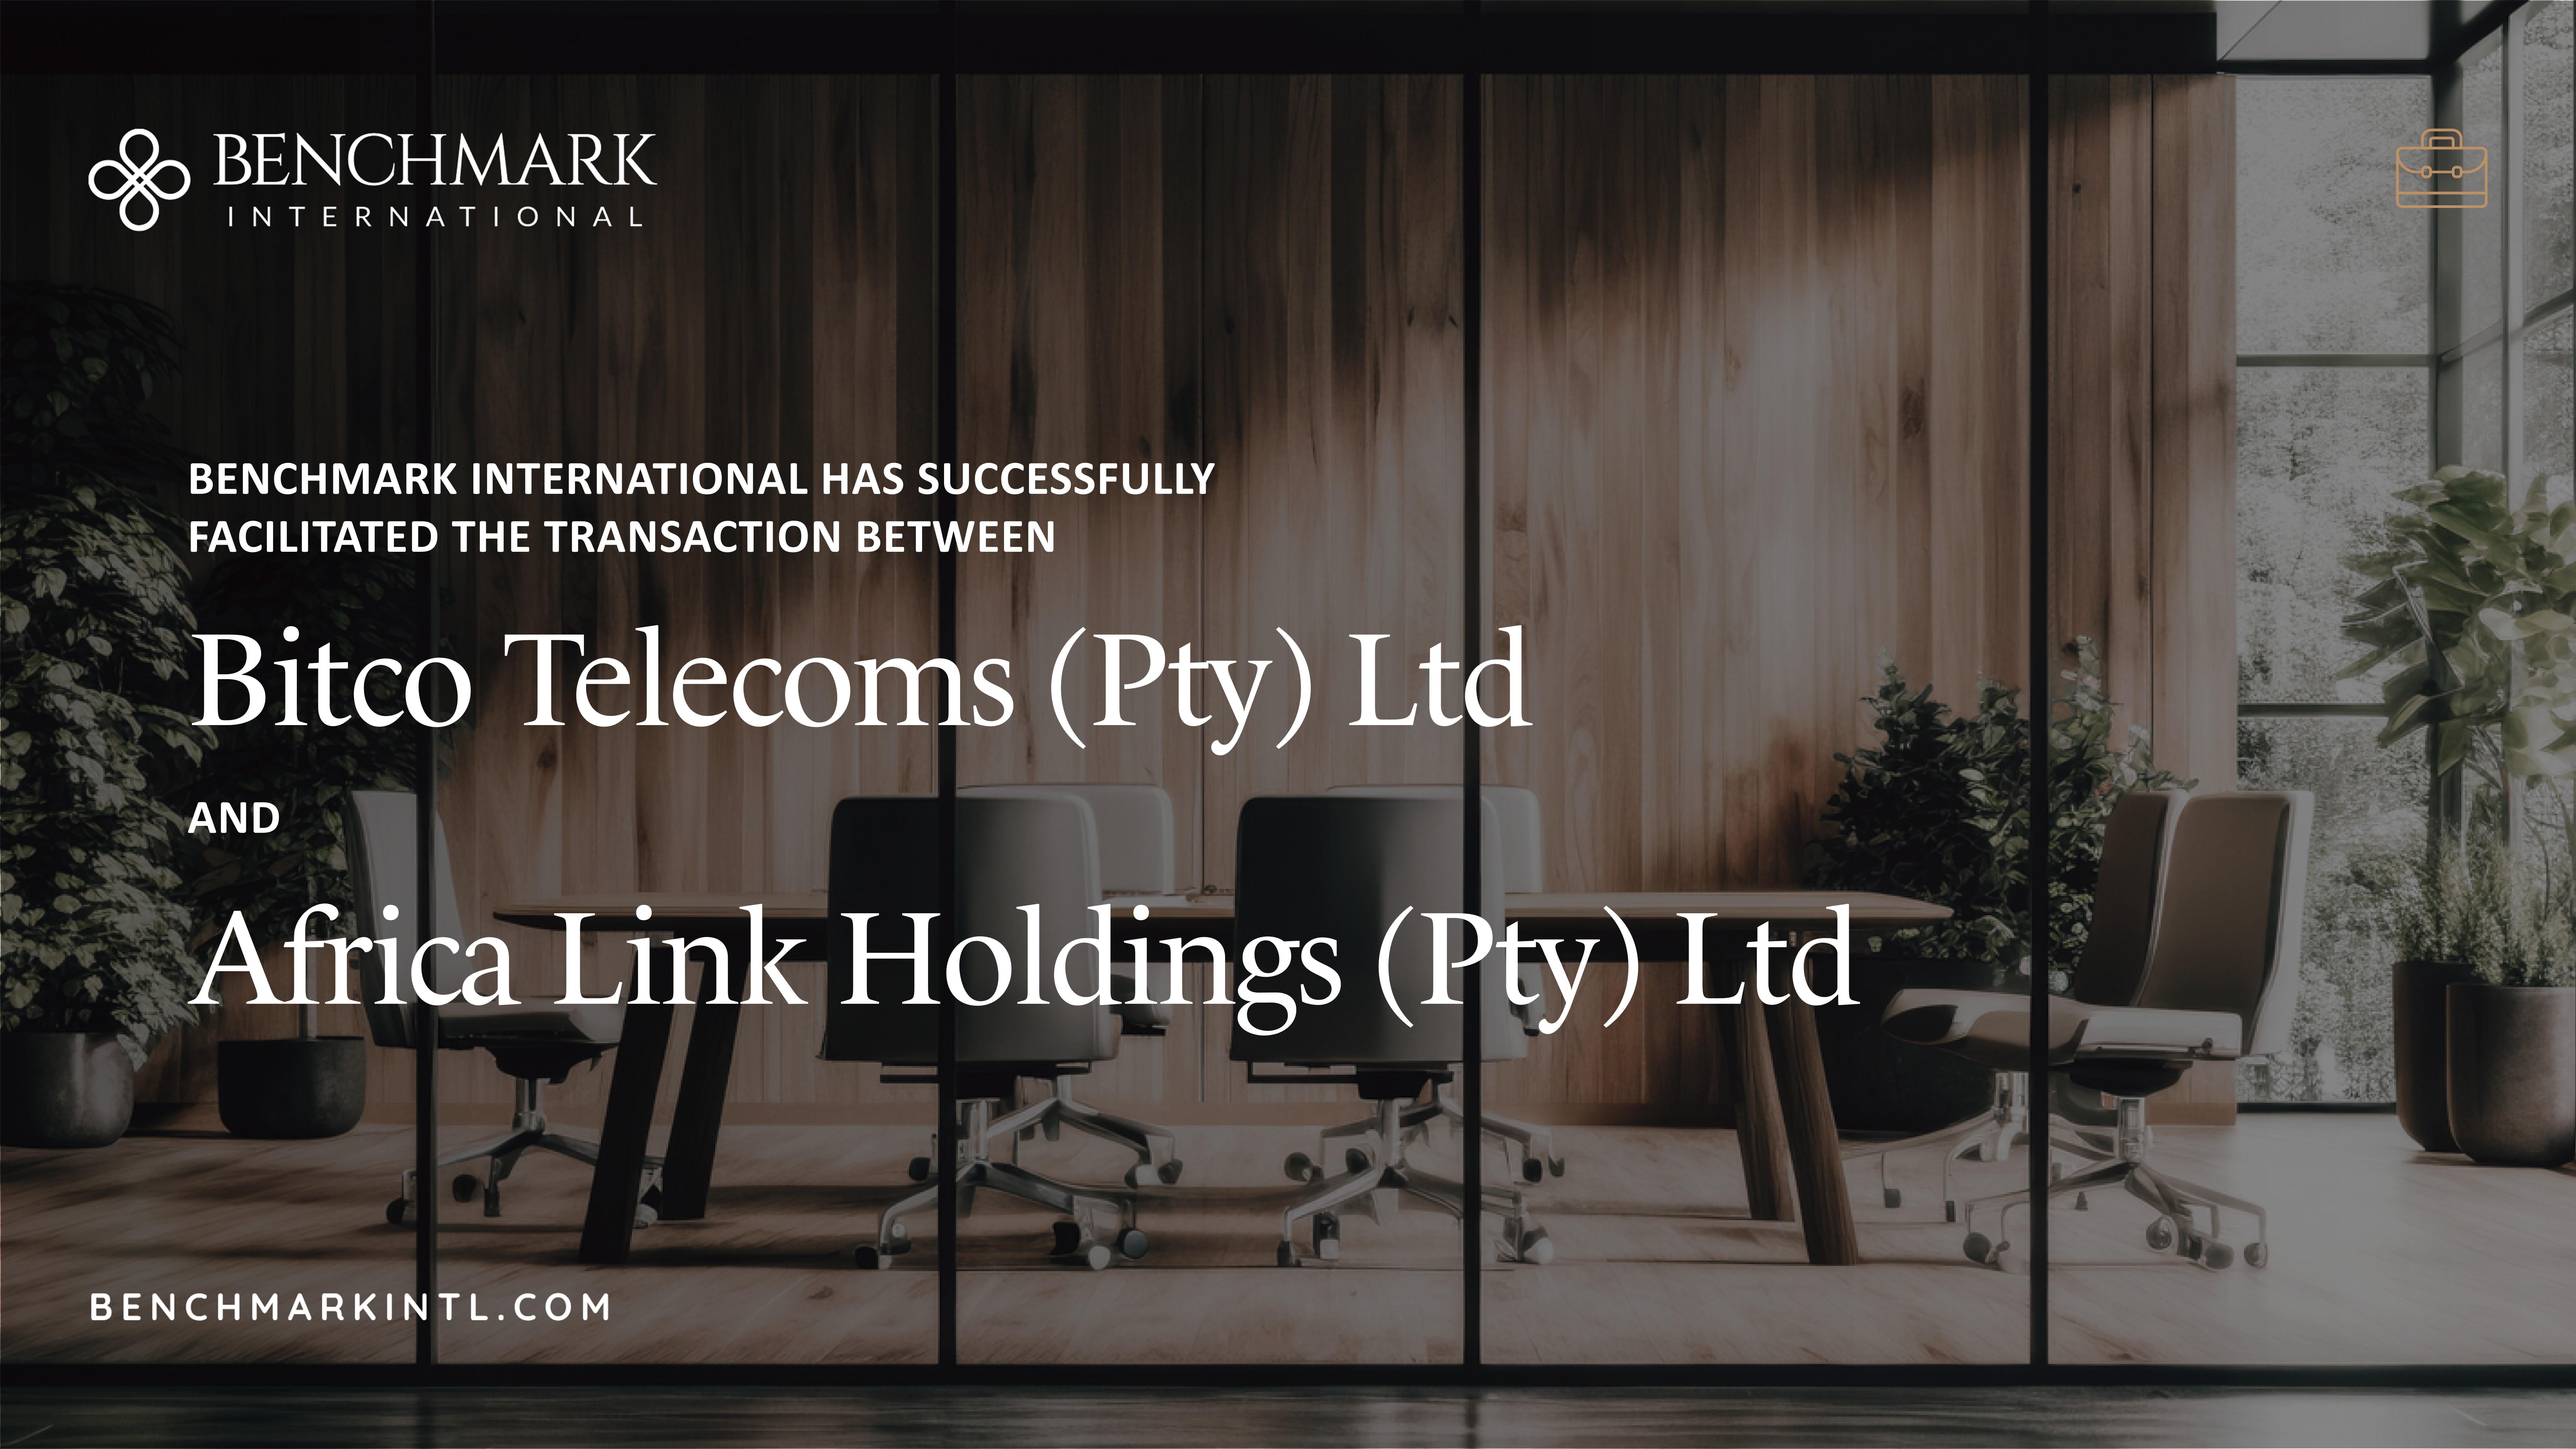 Benchmark International Successfully Facilitated The Transaction Between Bitco Telecoms (Pty) Ltd To Link Africa Holdings (Pty) Ltd